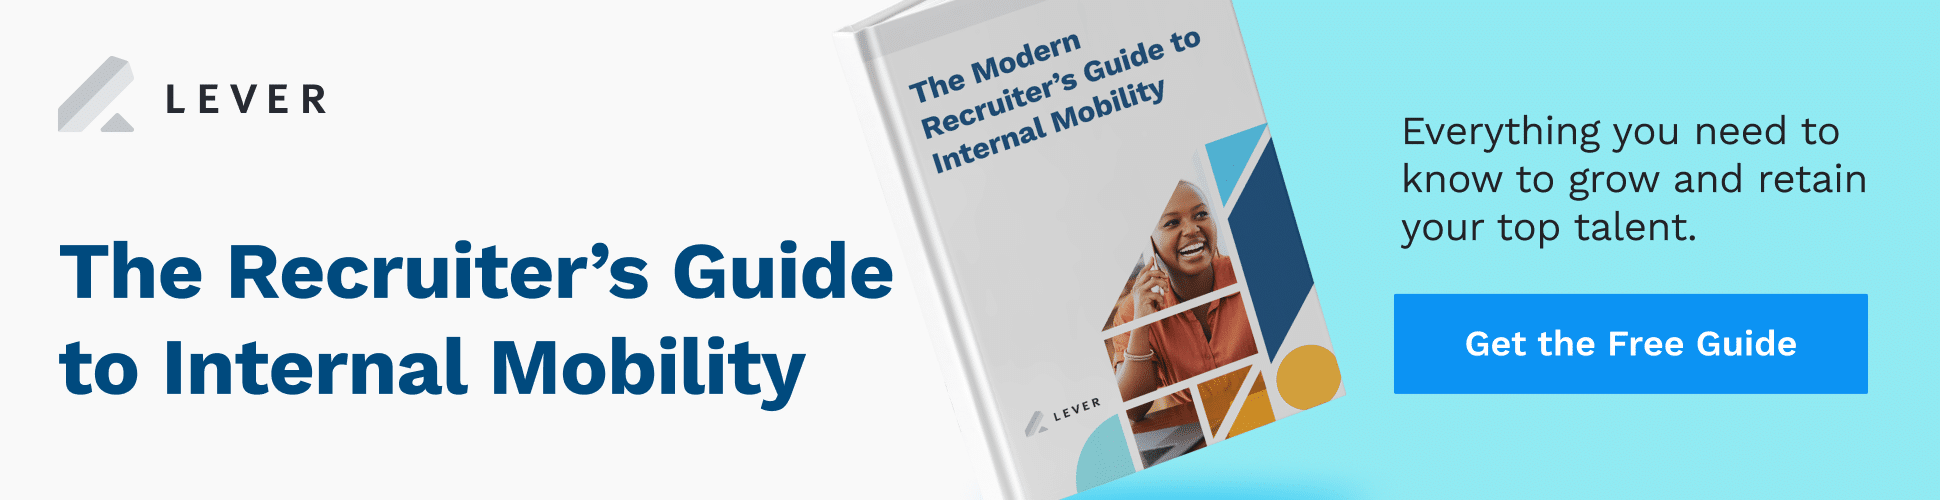 Internal Mobility Guide